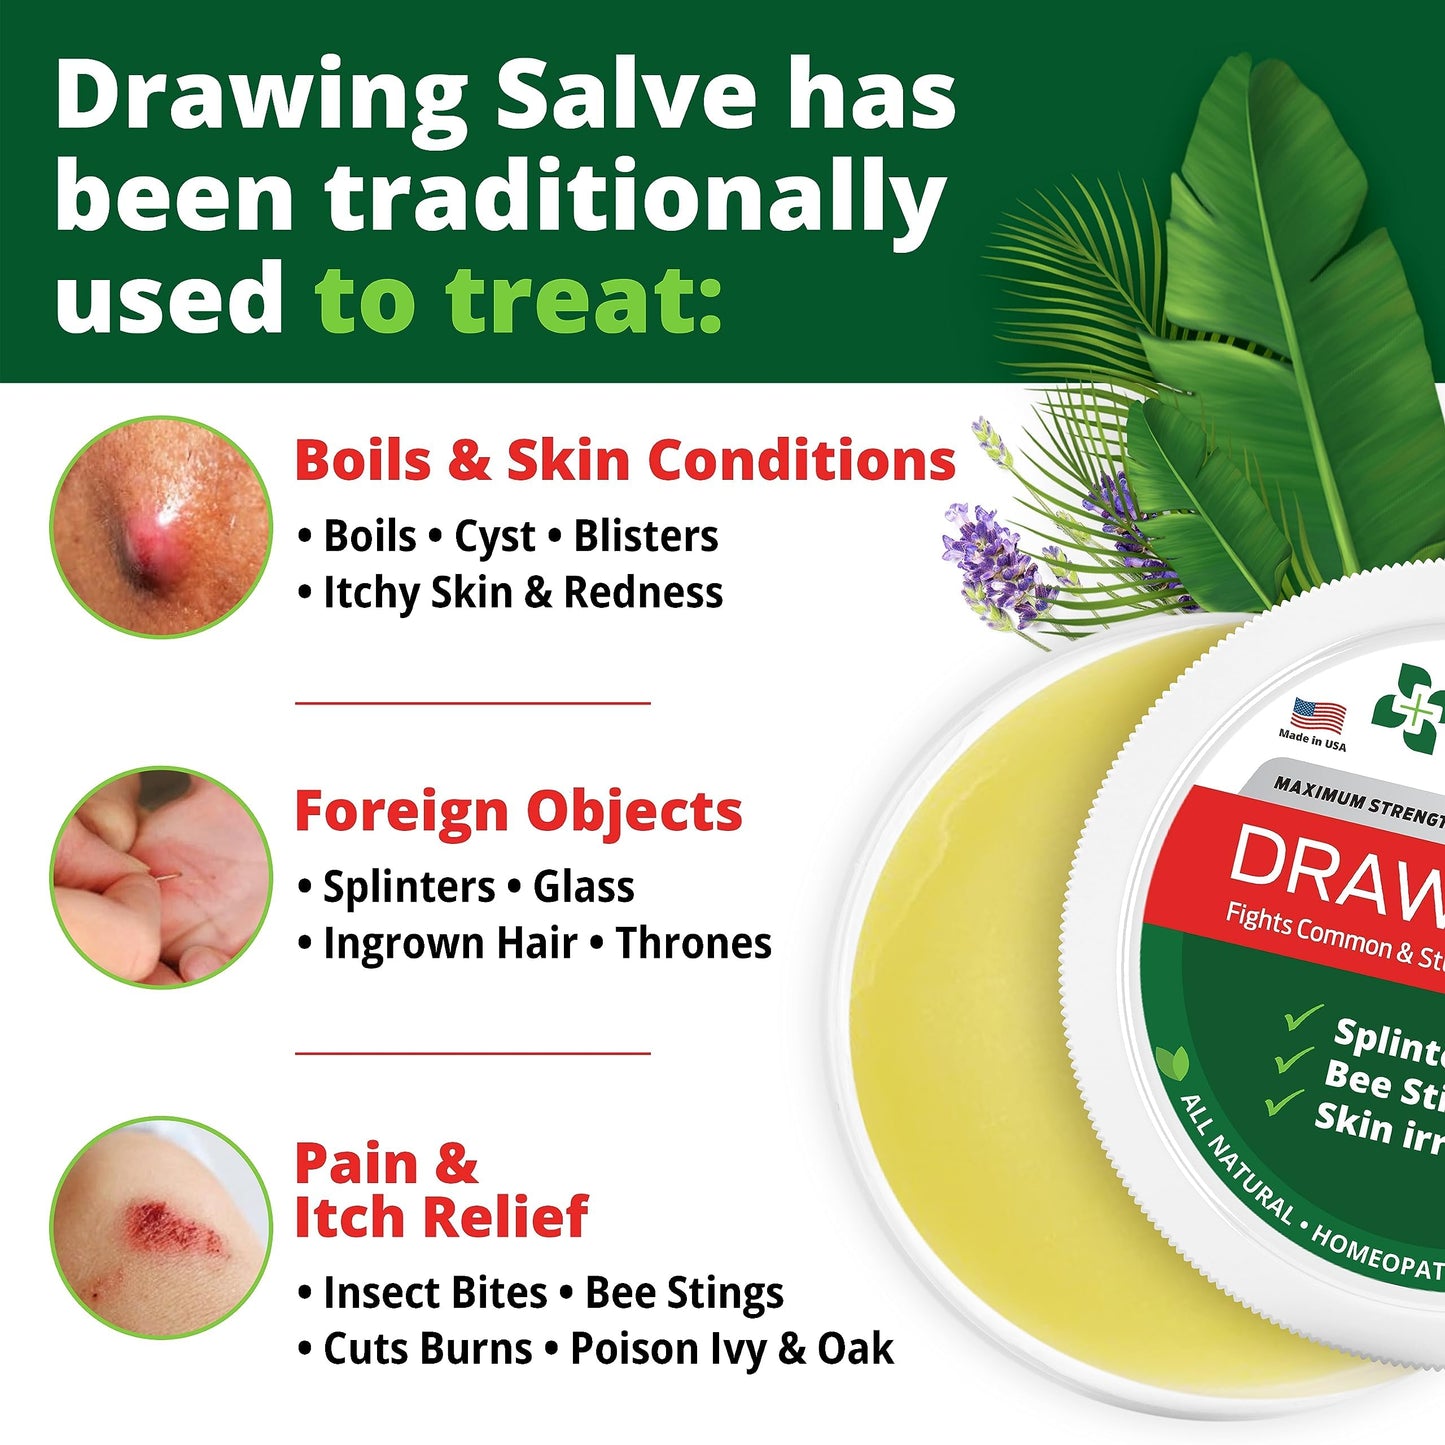 OWELL NATURALS Drawing Salve Ointment 1oz, ingrown Hair Treatment, Boil & Cyst, Splinter Remover, Bug and Spider Bites, bee Sting, Mosquito bite Itch Relief, Poison Ivy